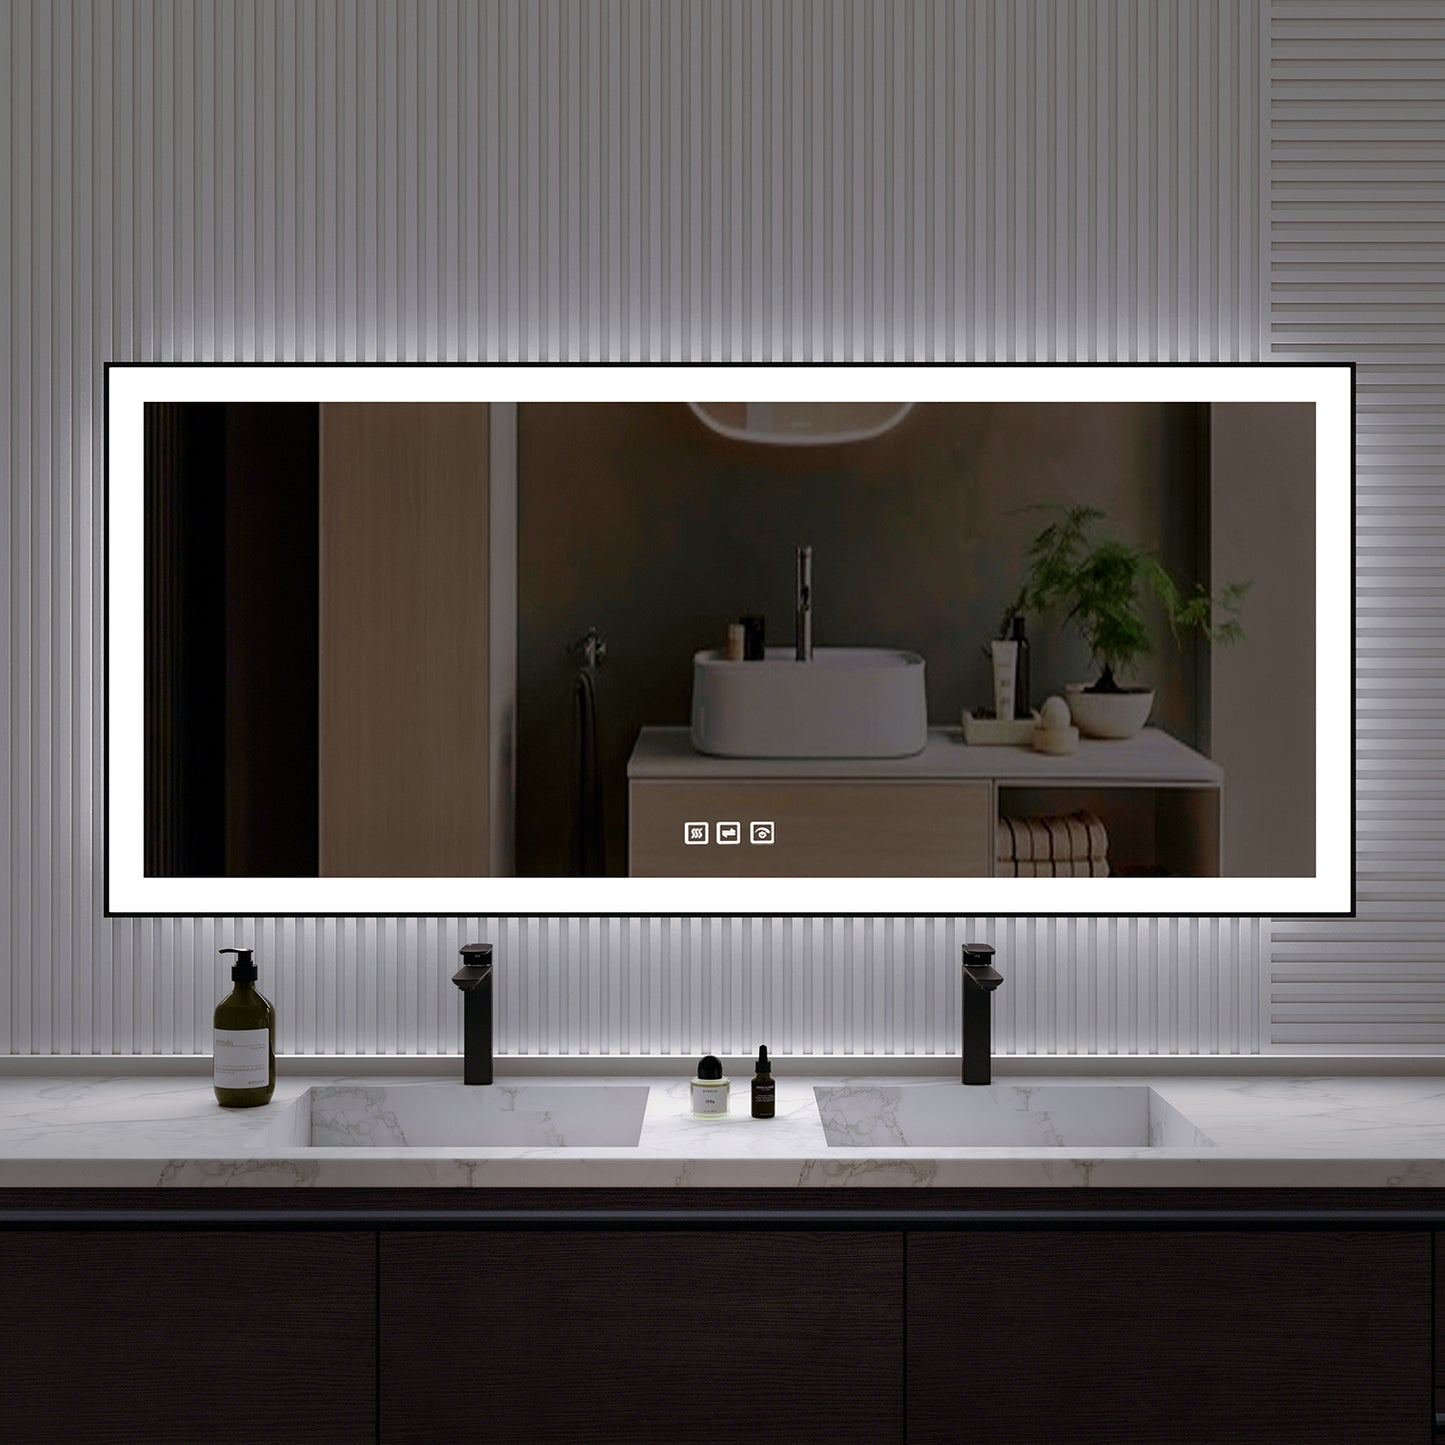 Waterpar® 72 in. W x 32 in. H Rectangular Framed Anti-Fog LED Wall Bathroom Vanity Mirror in Black with Backlit and Front Light